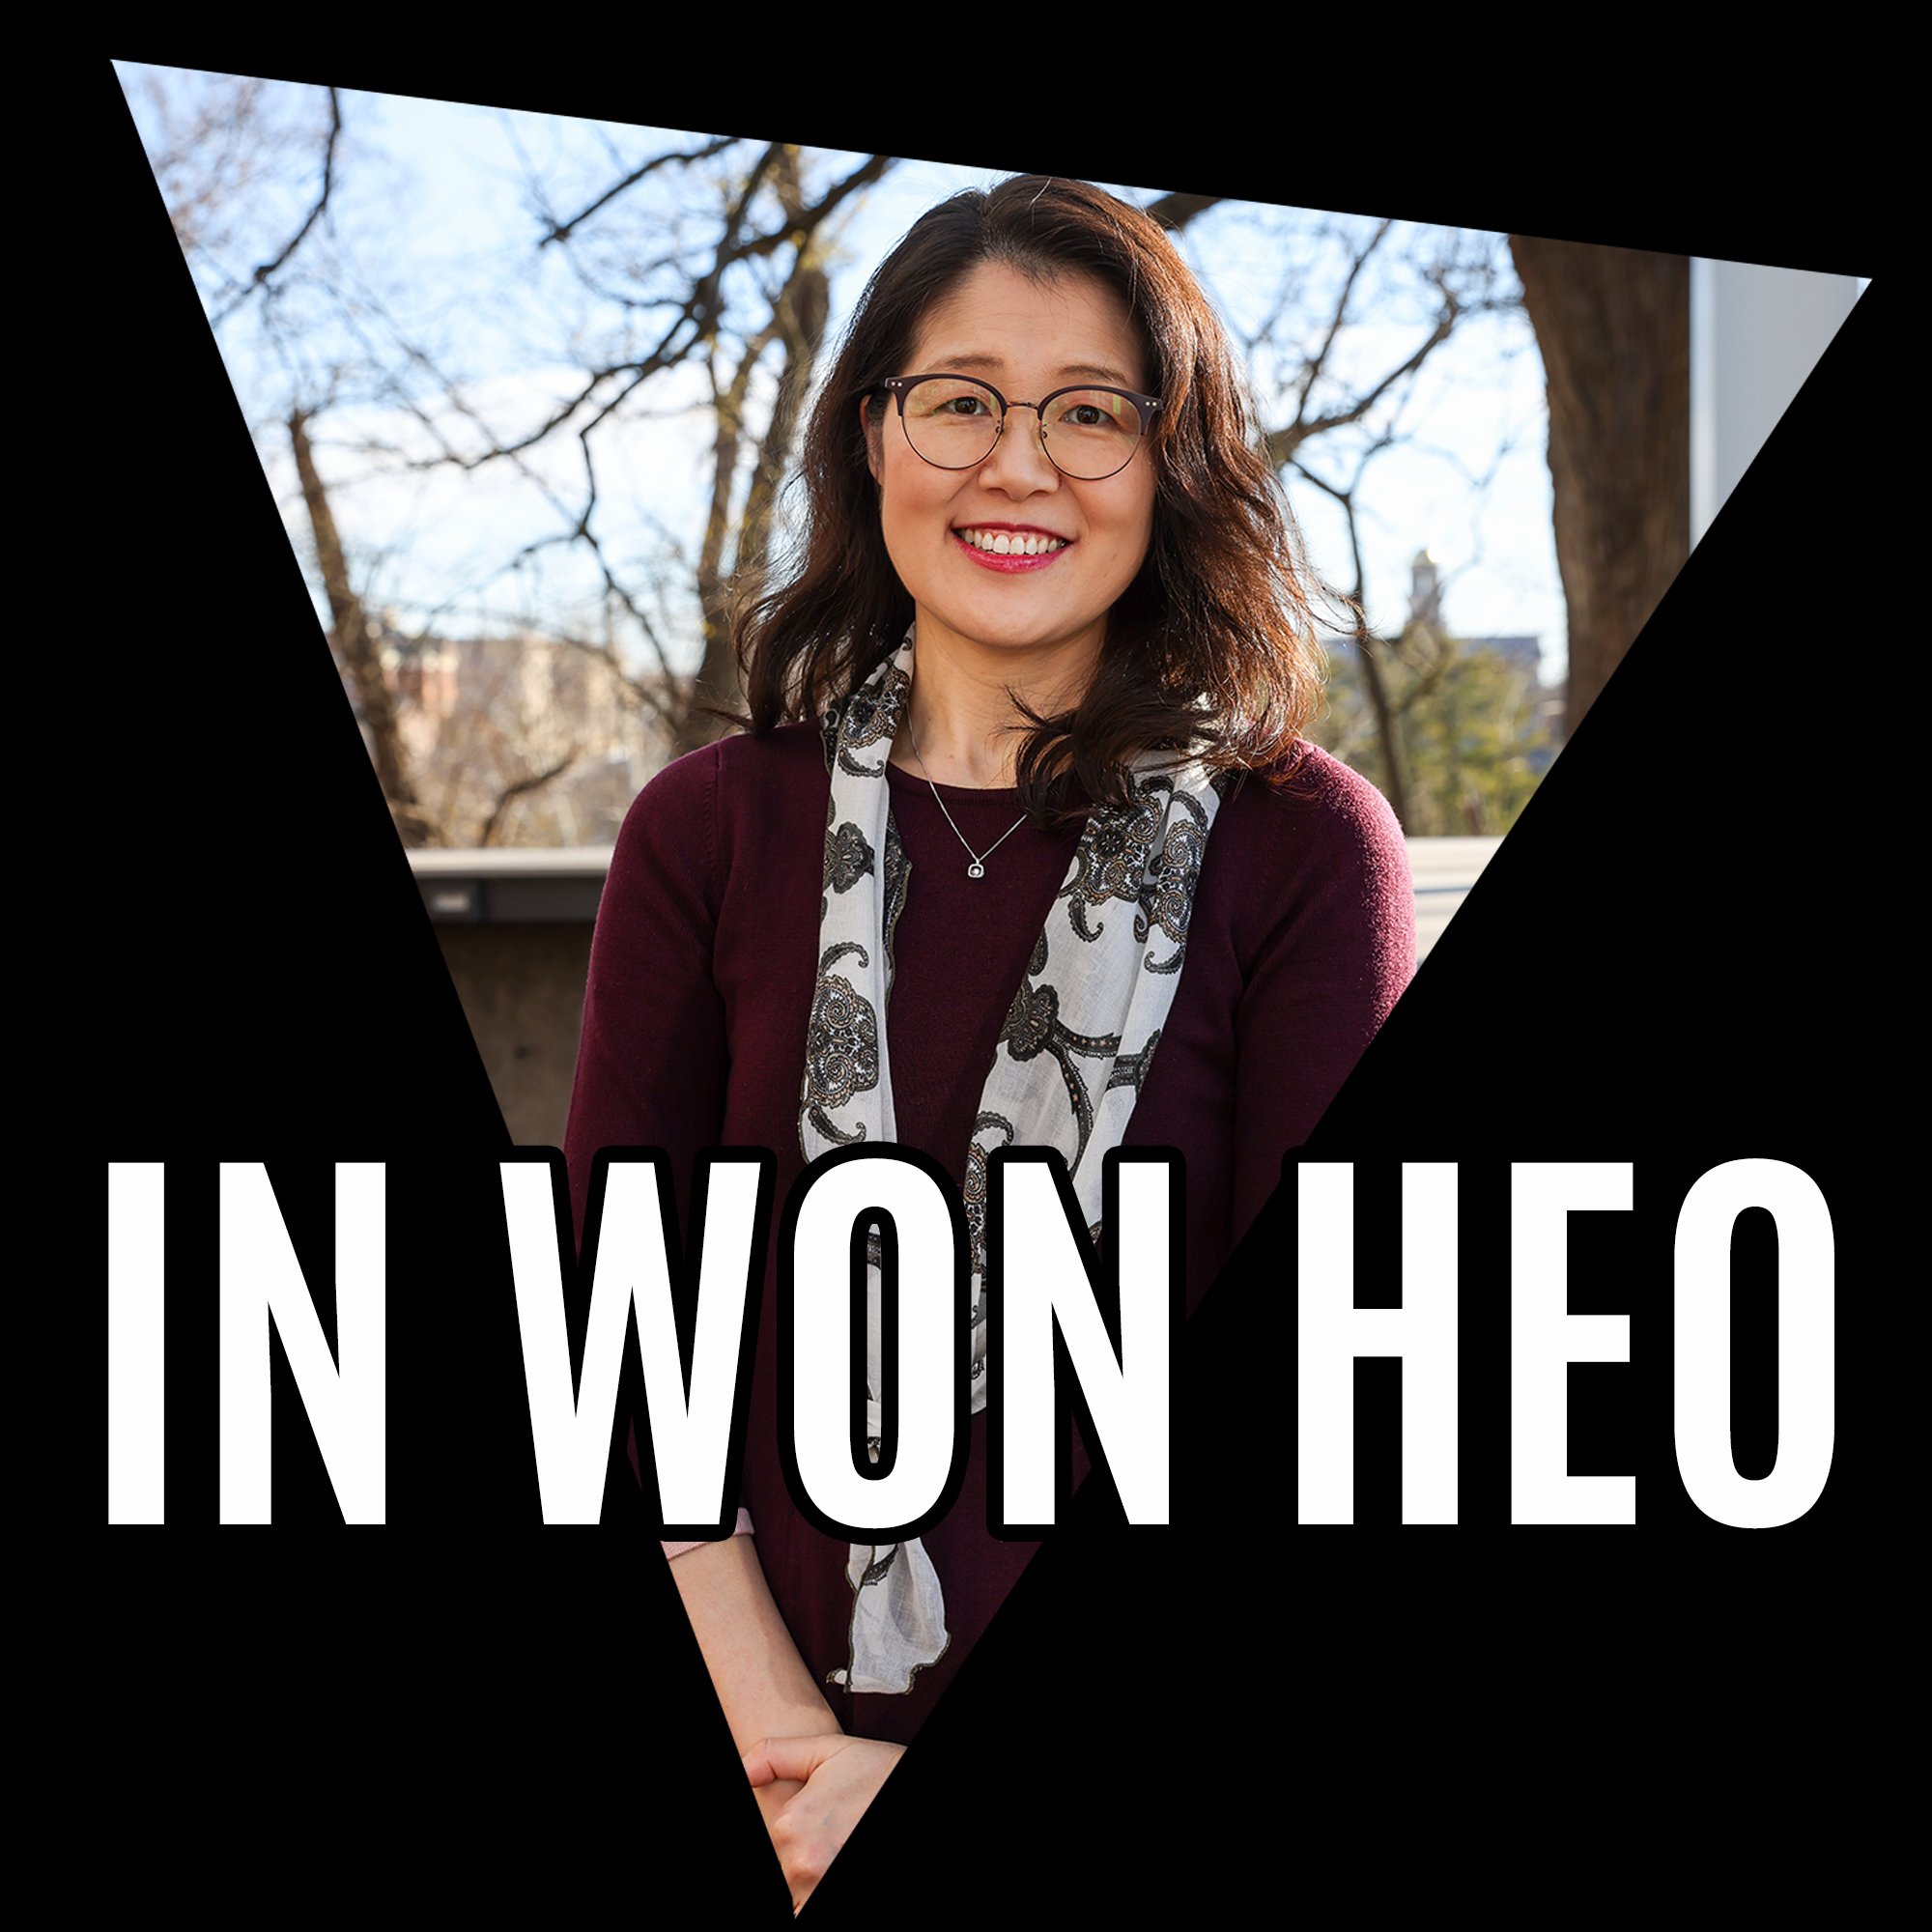 Portrait of smiling woman with the name In Won Heo in large white letters. 